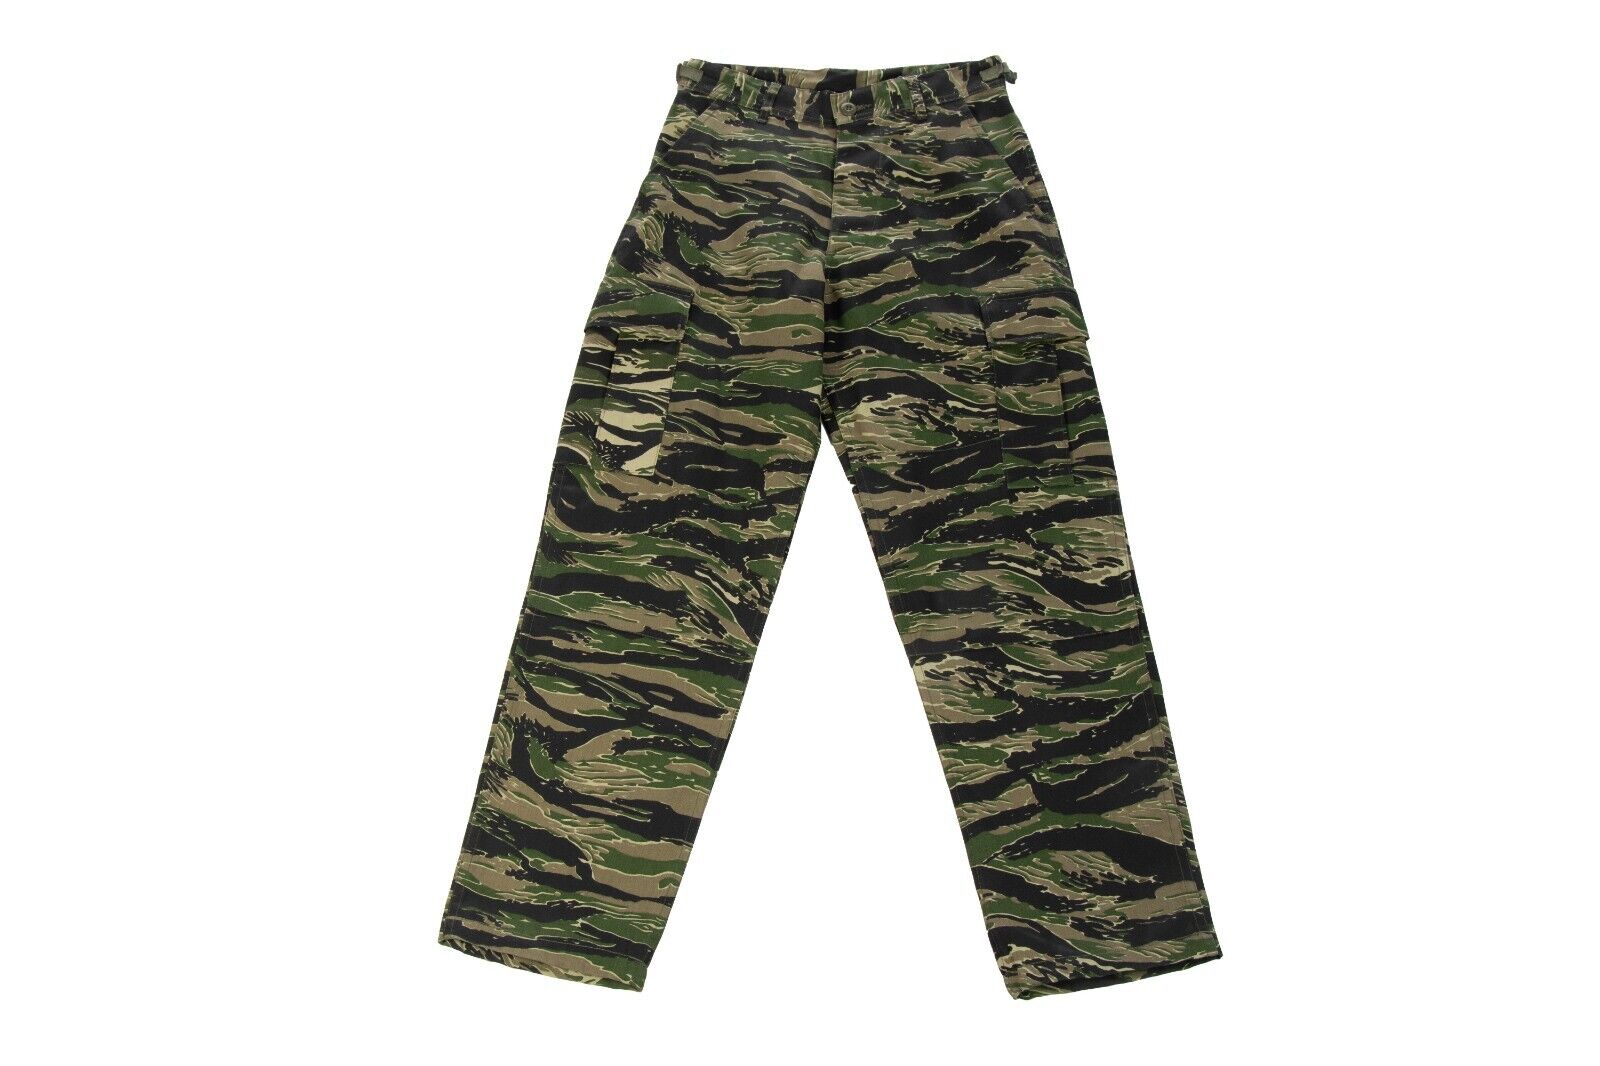 US Army Style Tiger Stripe Pants Trousers Camo Combat Trouser TigerStripe Cargo